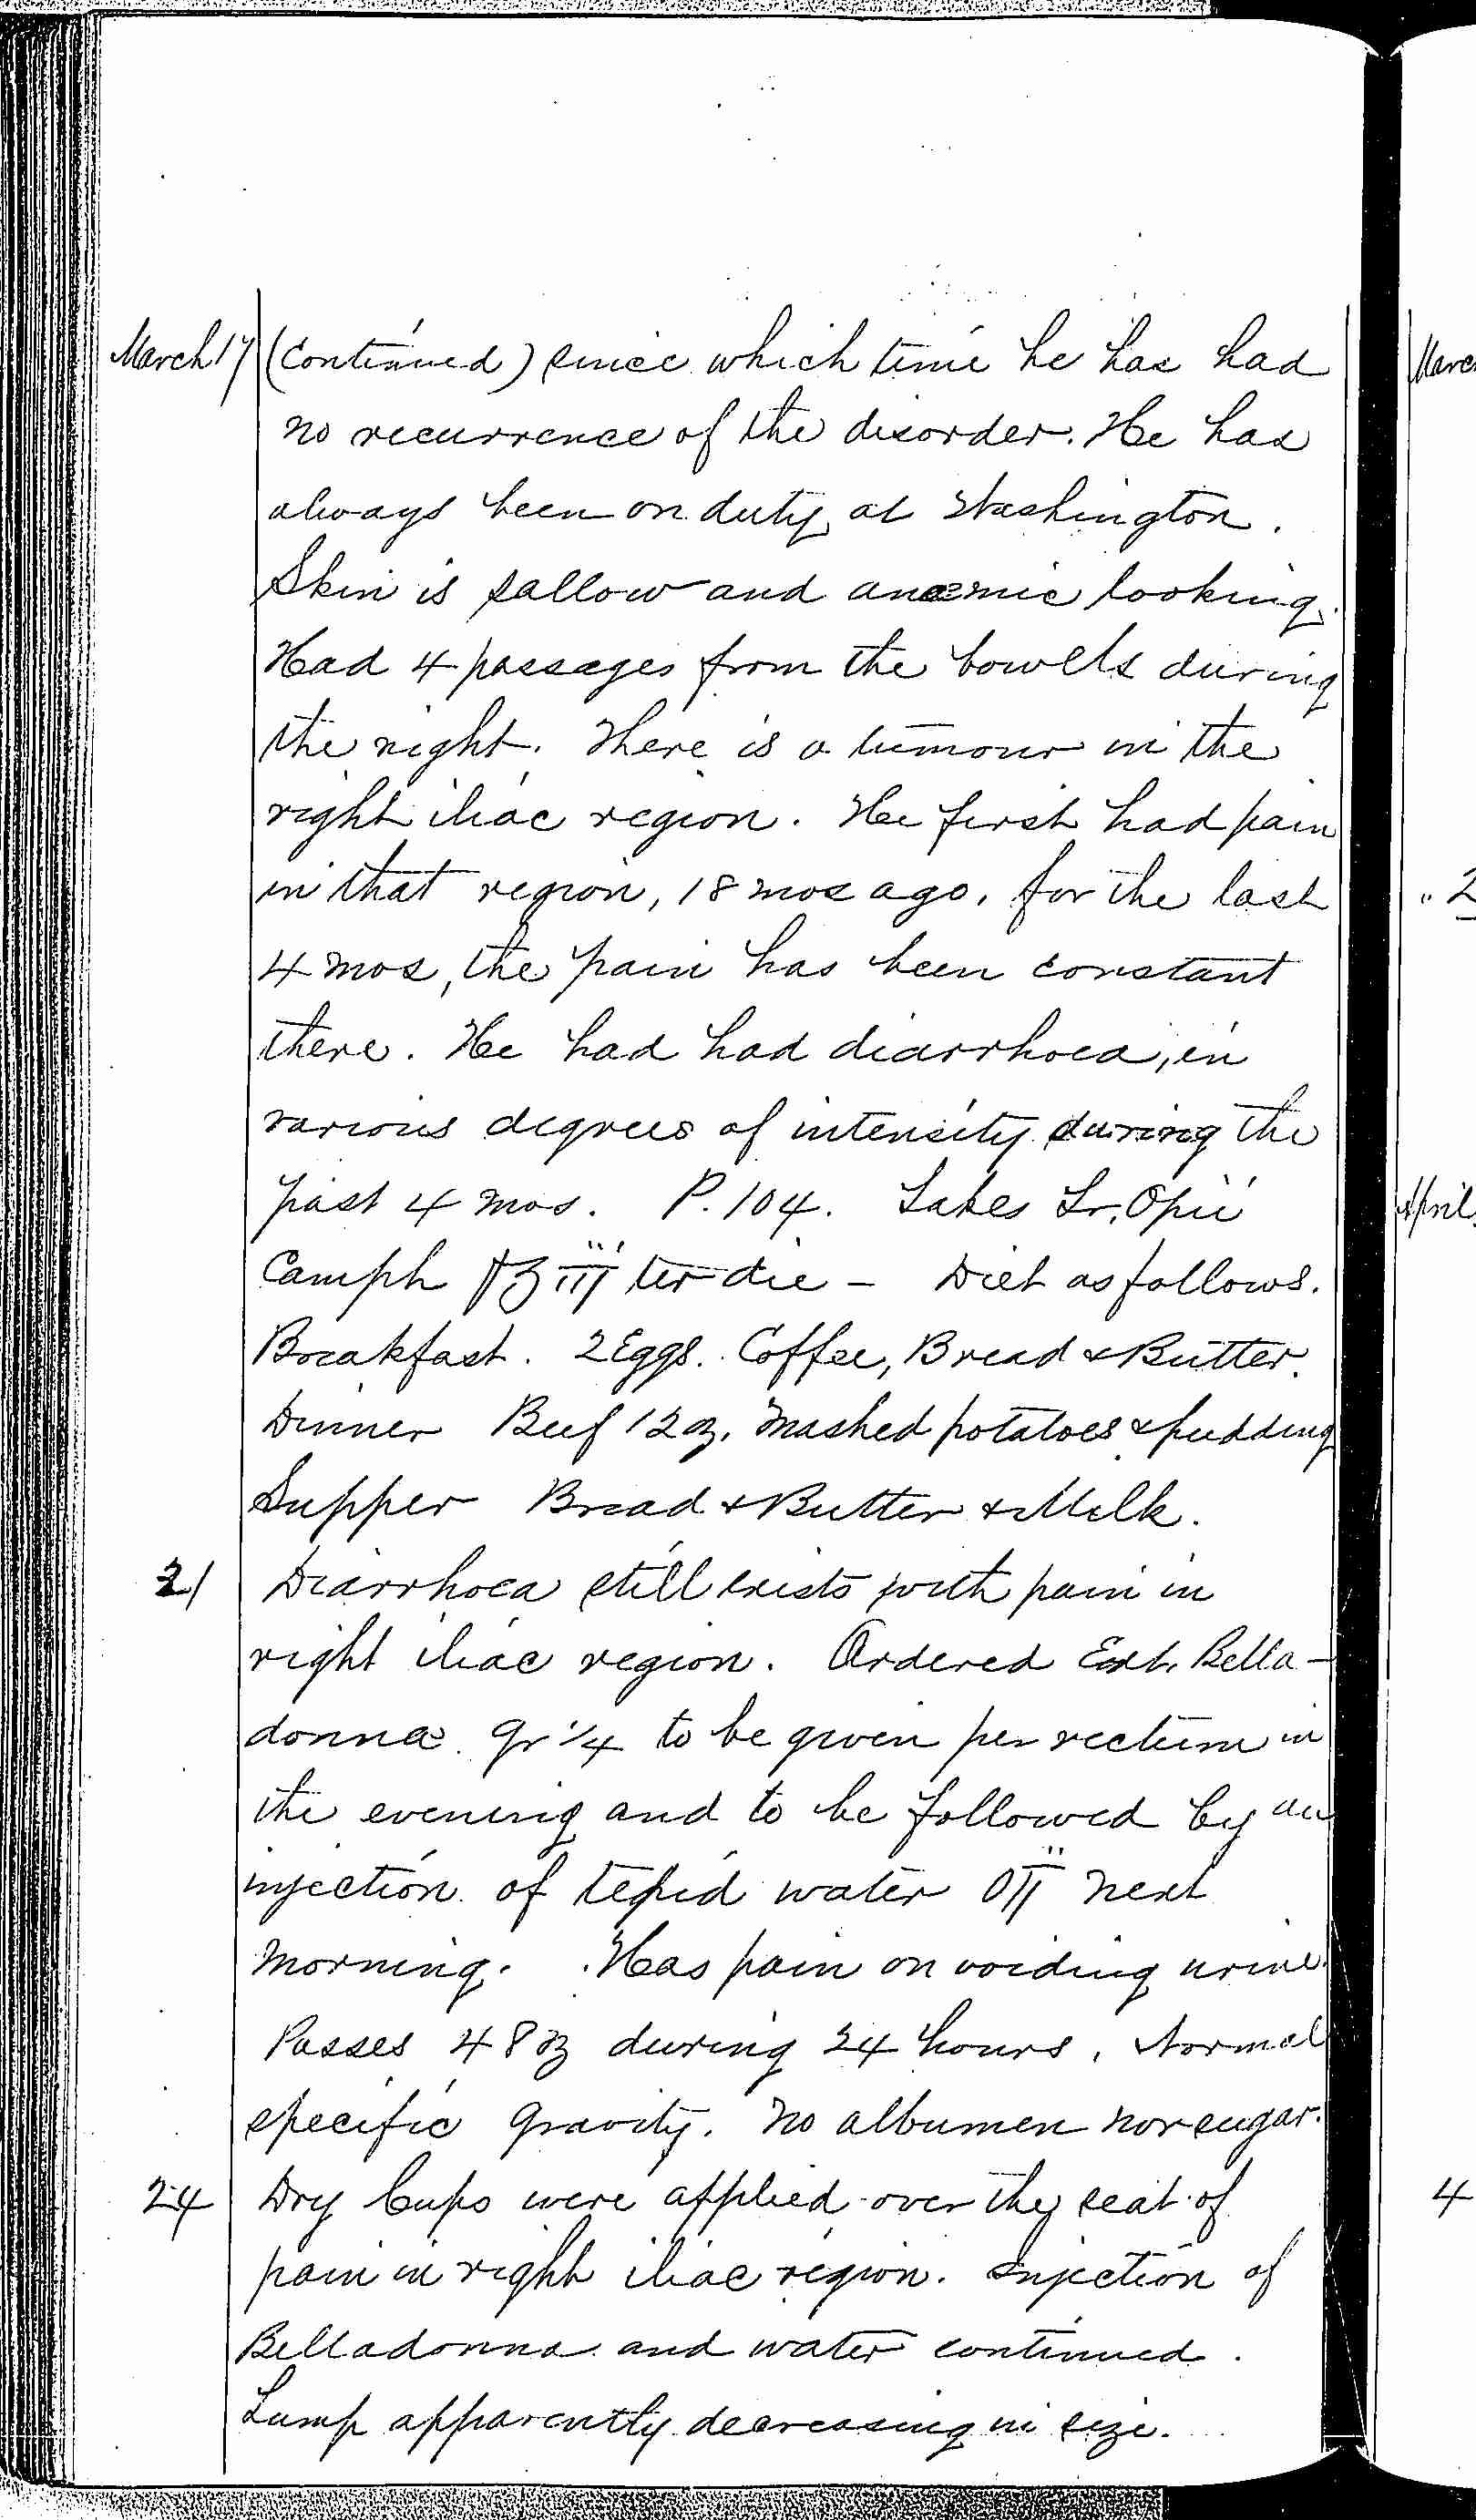 Entry for William Brady (page 2 of 5) in the log Hospital Tickets and Case Papers - Naval Hospital - Washington, D.C. - 1868-69